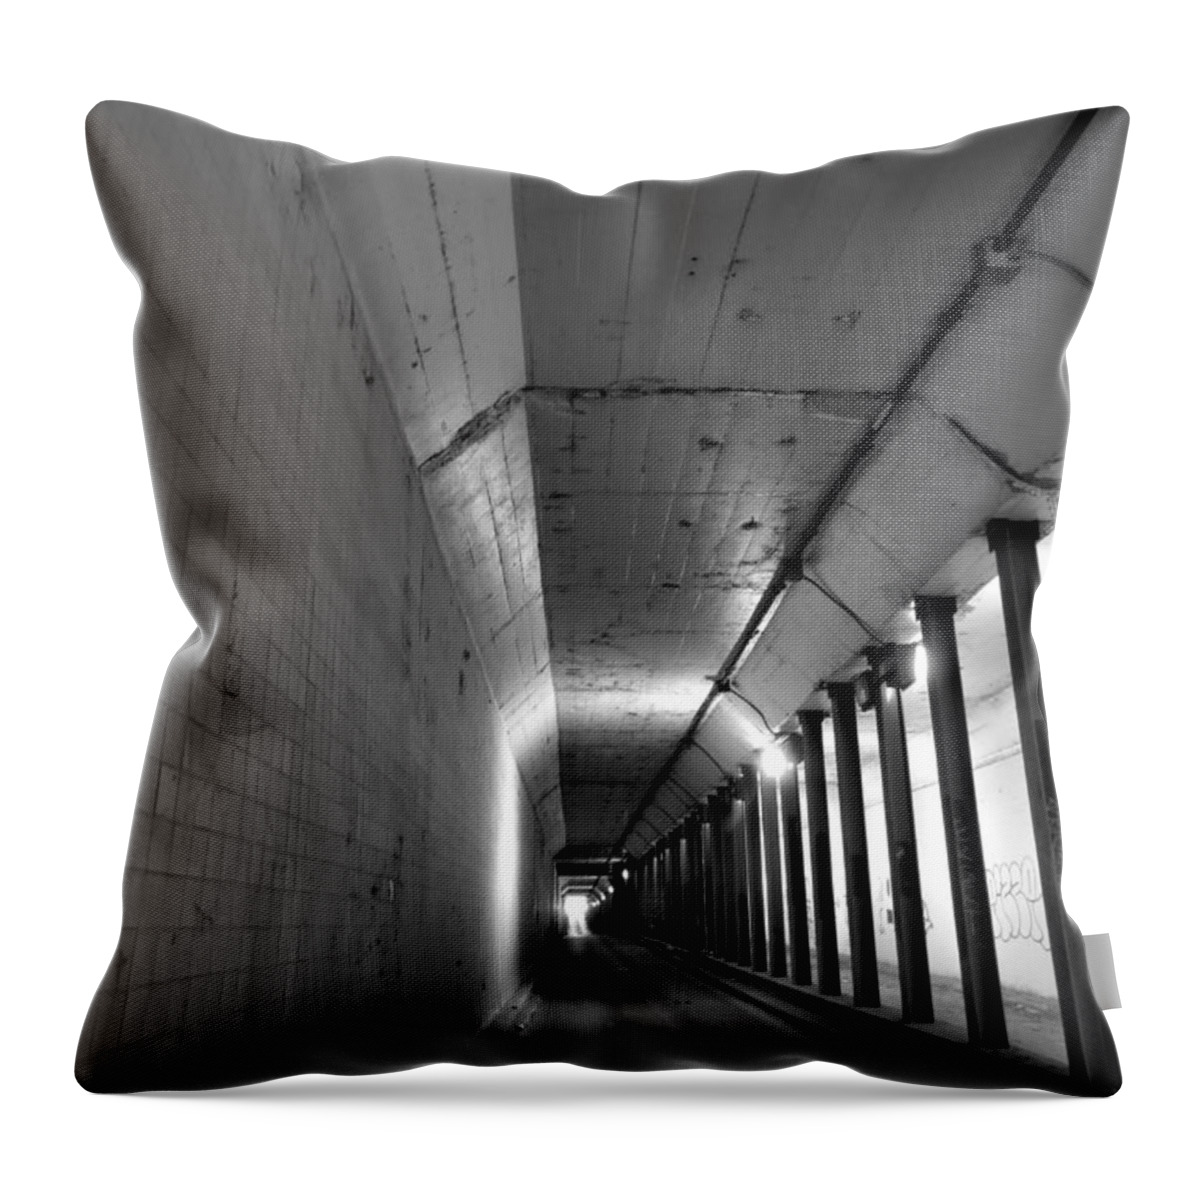 Philadelphia Throw Pillow featuring the photograph Tunnel by Art Dingo